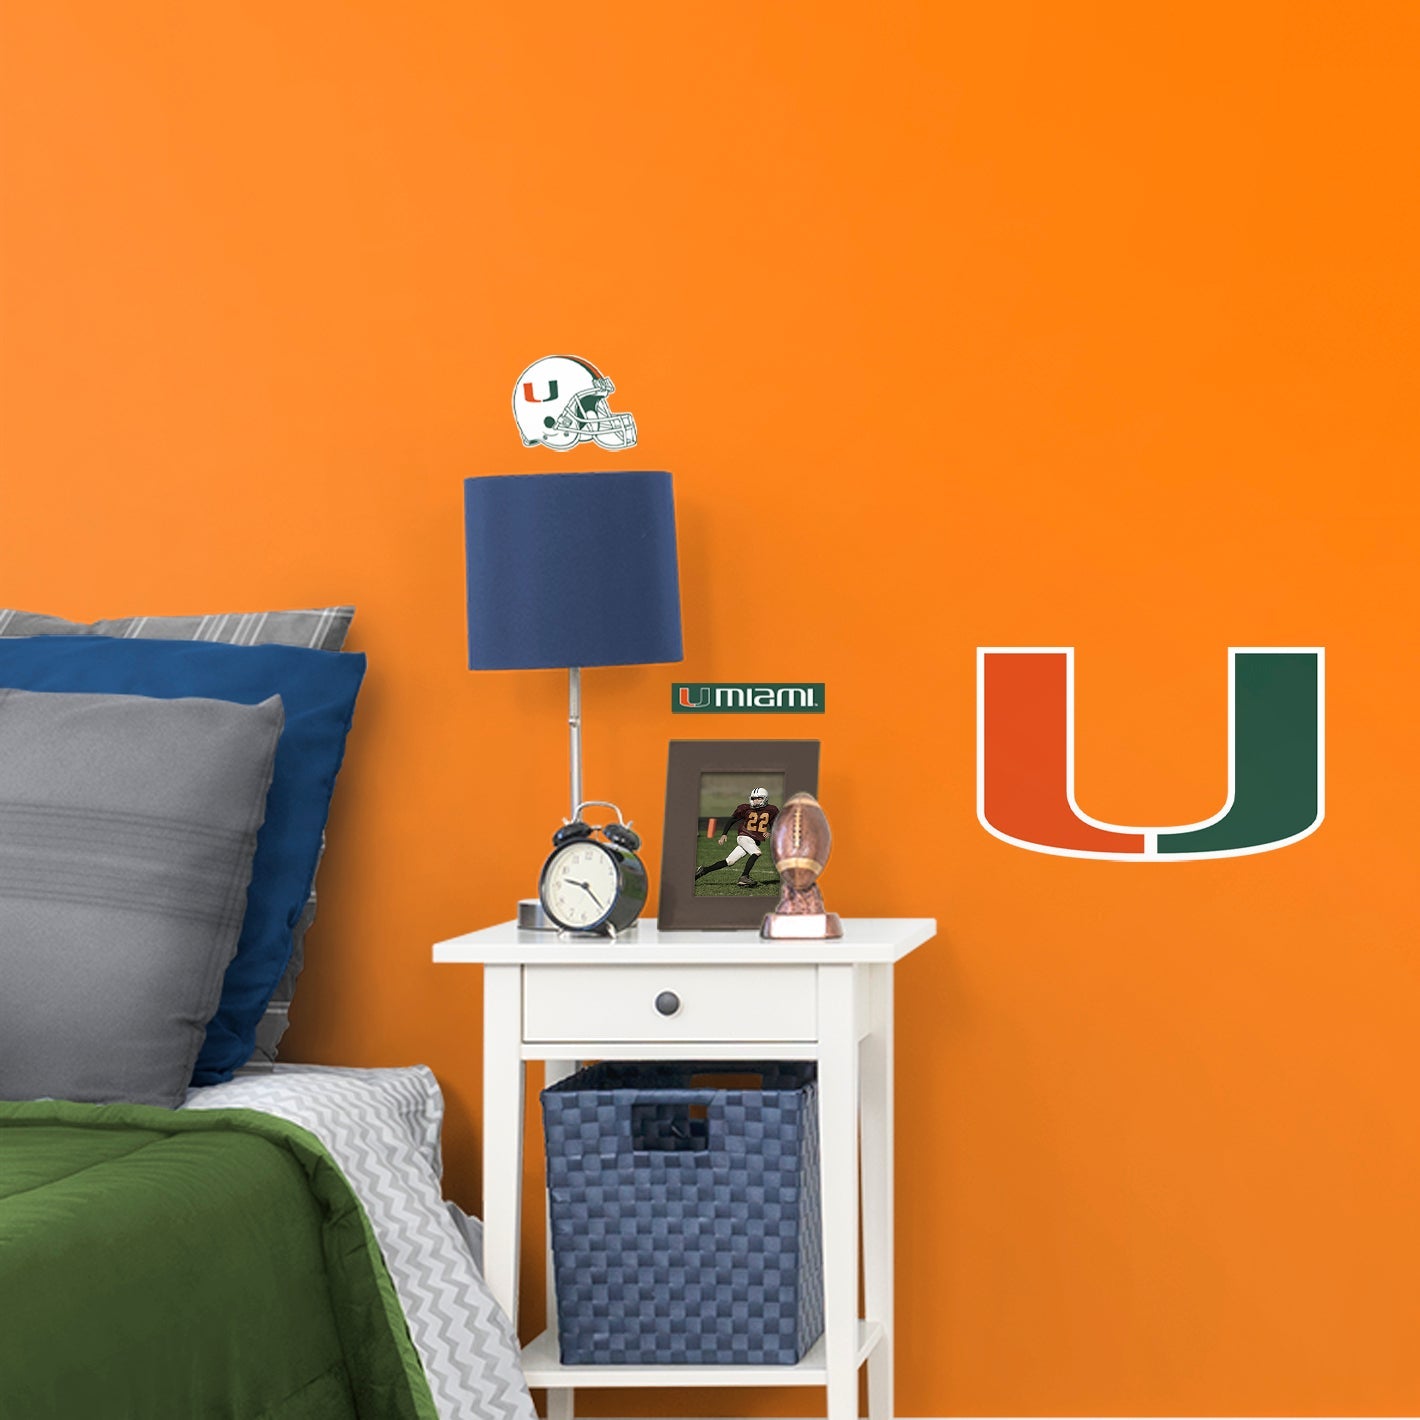 Miami Hurricanes: Logo - Officially Licensed NCAA Removable Adhesive Decal